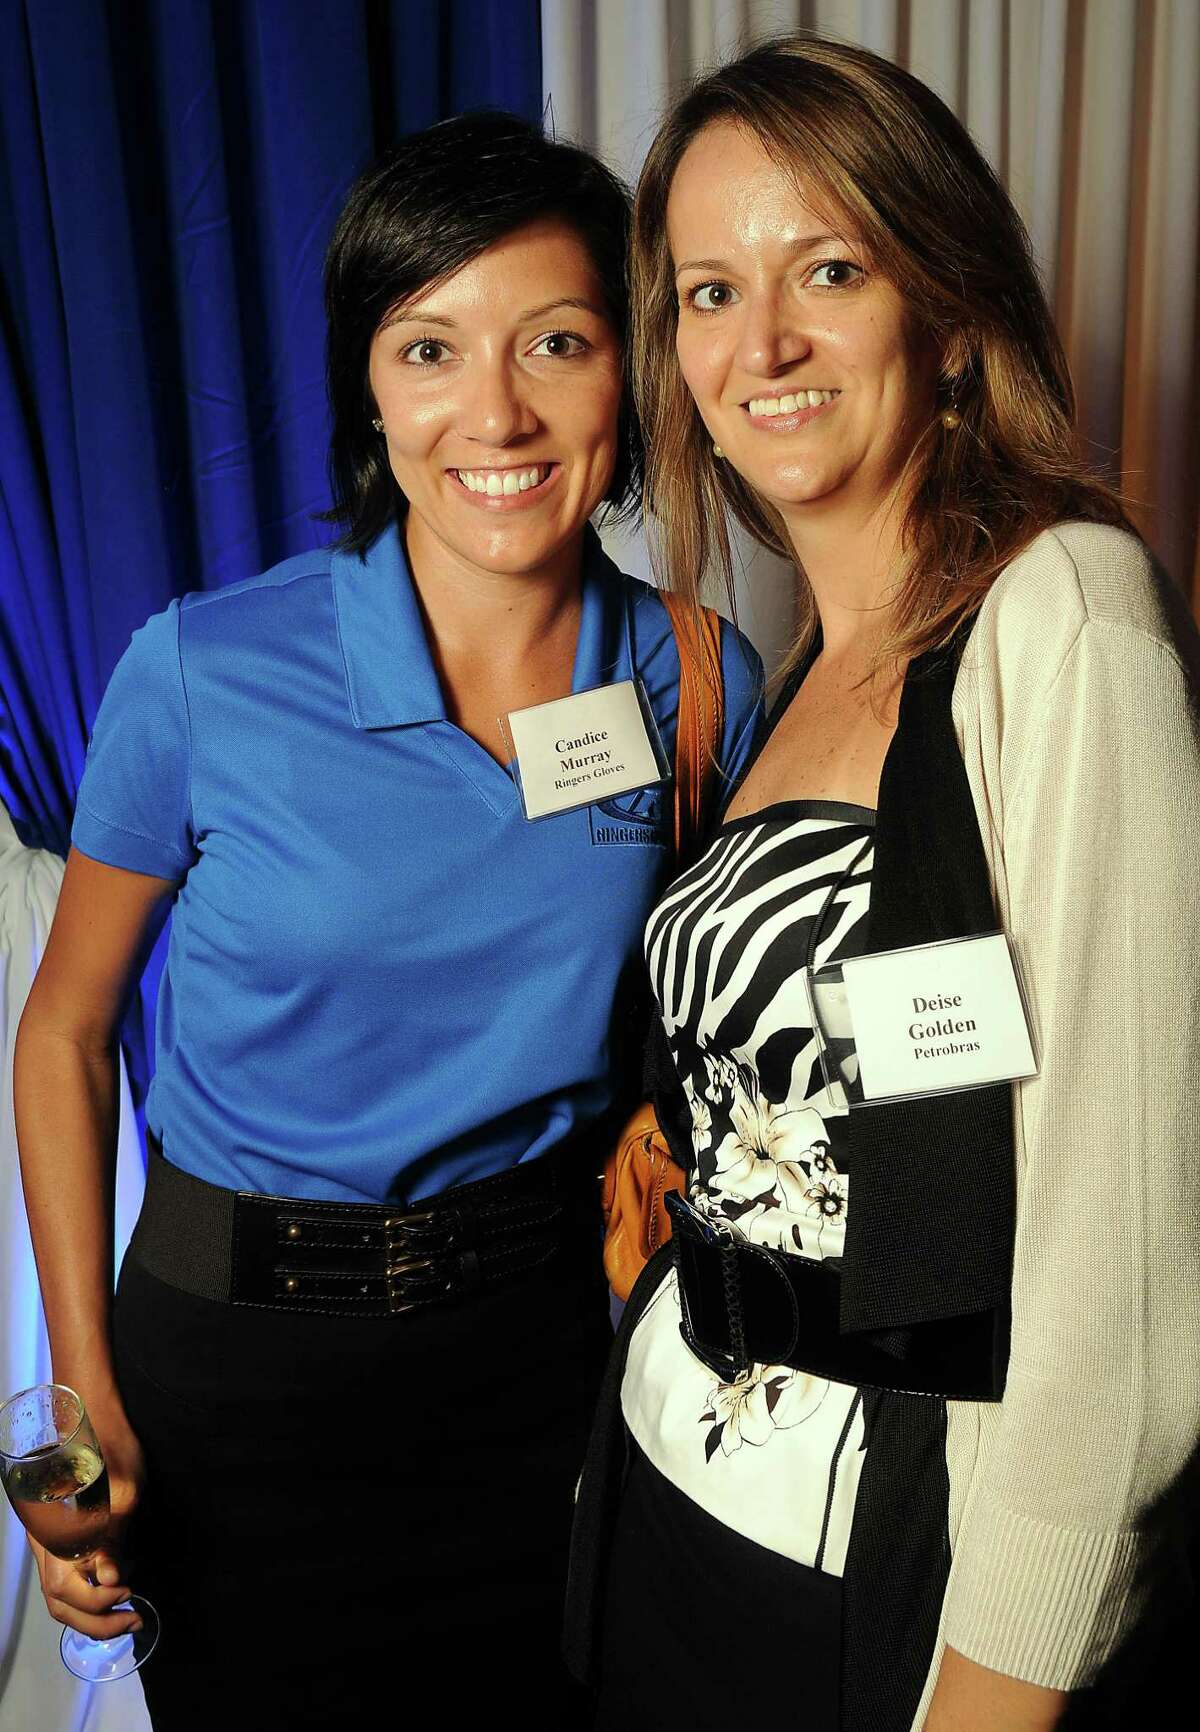 Candice Murray and Deise Golden at the Technip reception at the Hotel Derek Tuesday May 1,2012. (Dave Rossman Photo)